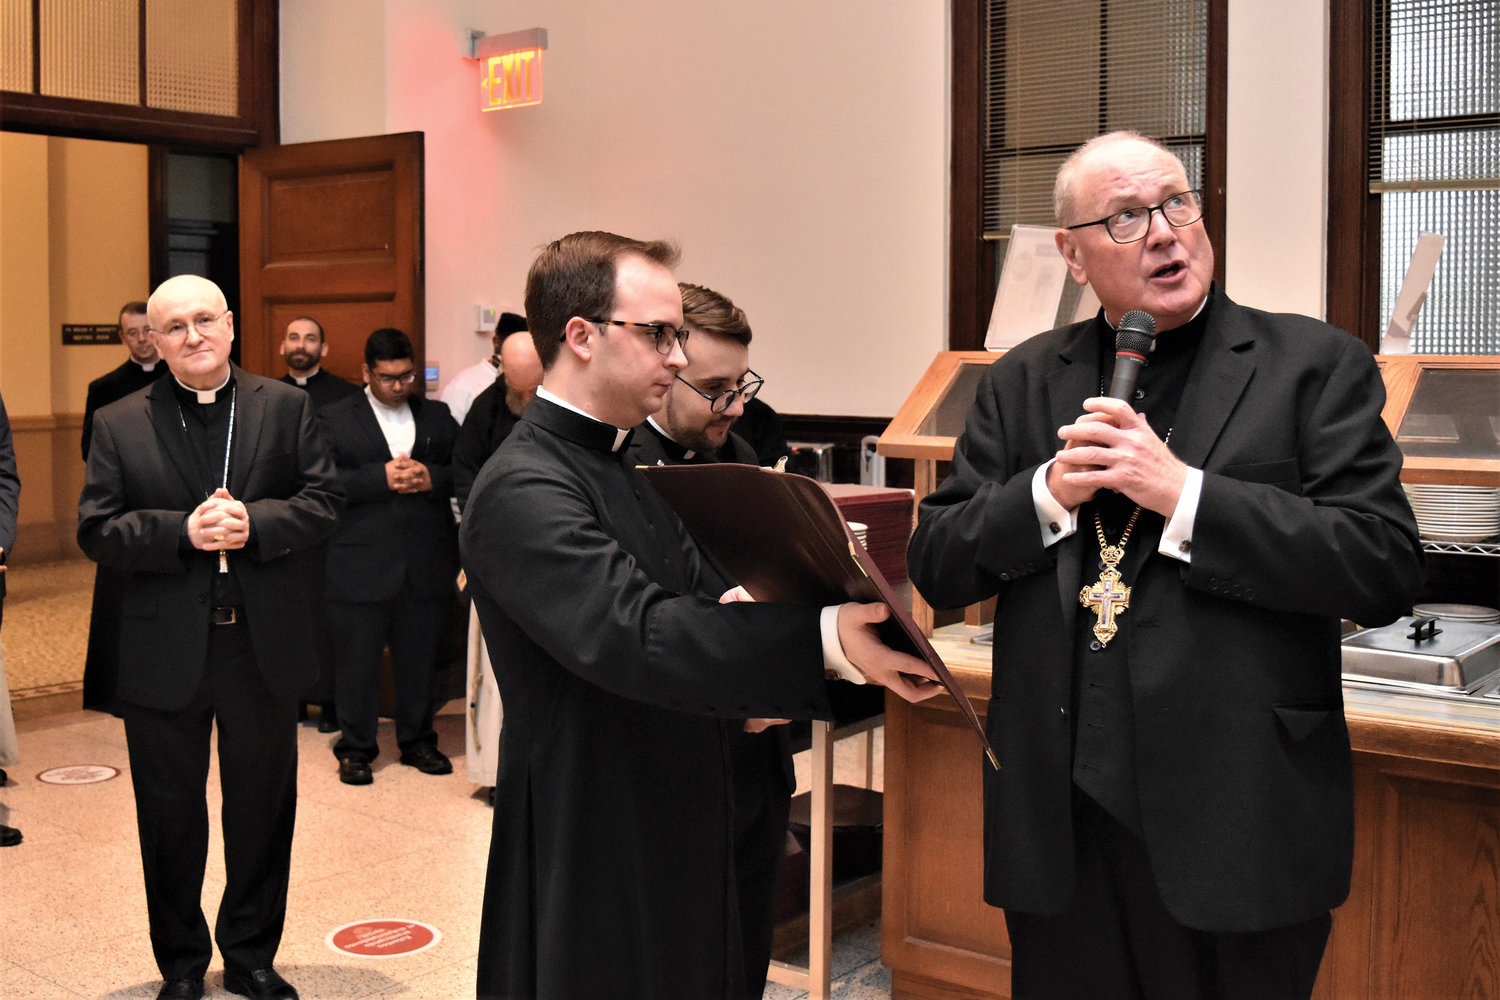 Cardinal Dolan delivers a final blessing at a reception for the closing of the 125th anniversary year. The seminarian holding the prayer book is Andrew LeFleur of the Diocese of Bridgeport, Conn., and to the left is Brooklyn Auxiliary Bishop James Massa, seminary rector.